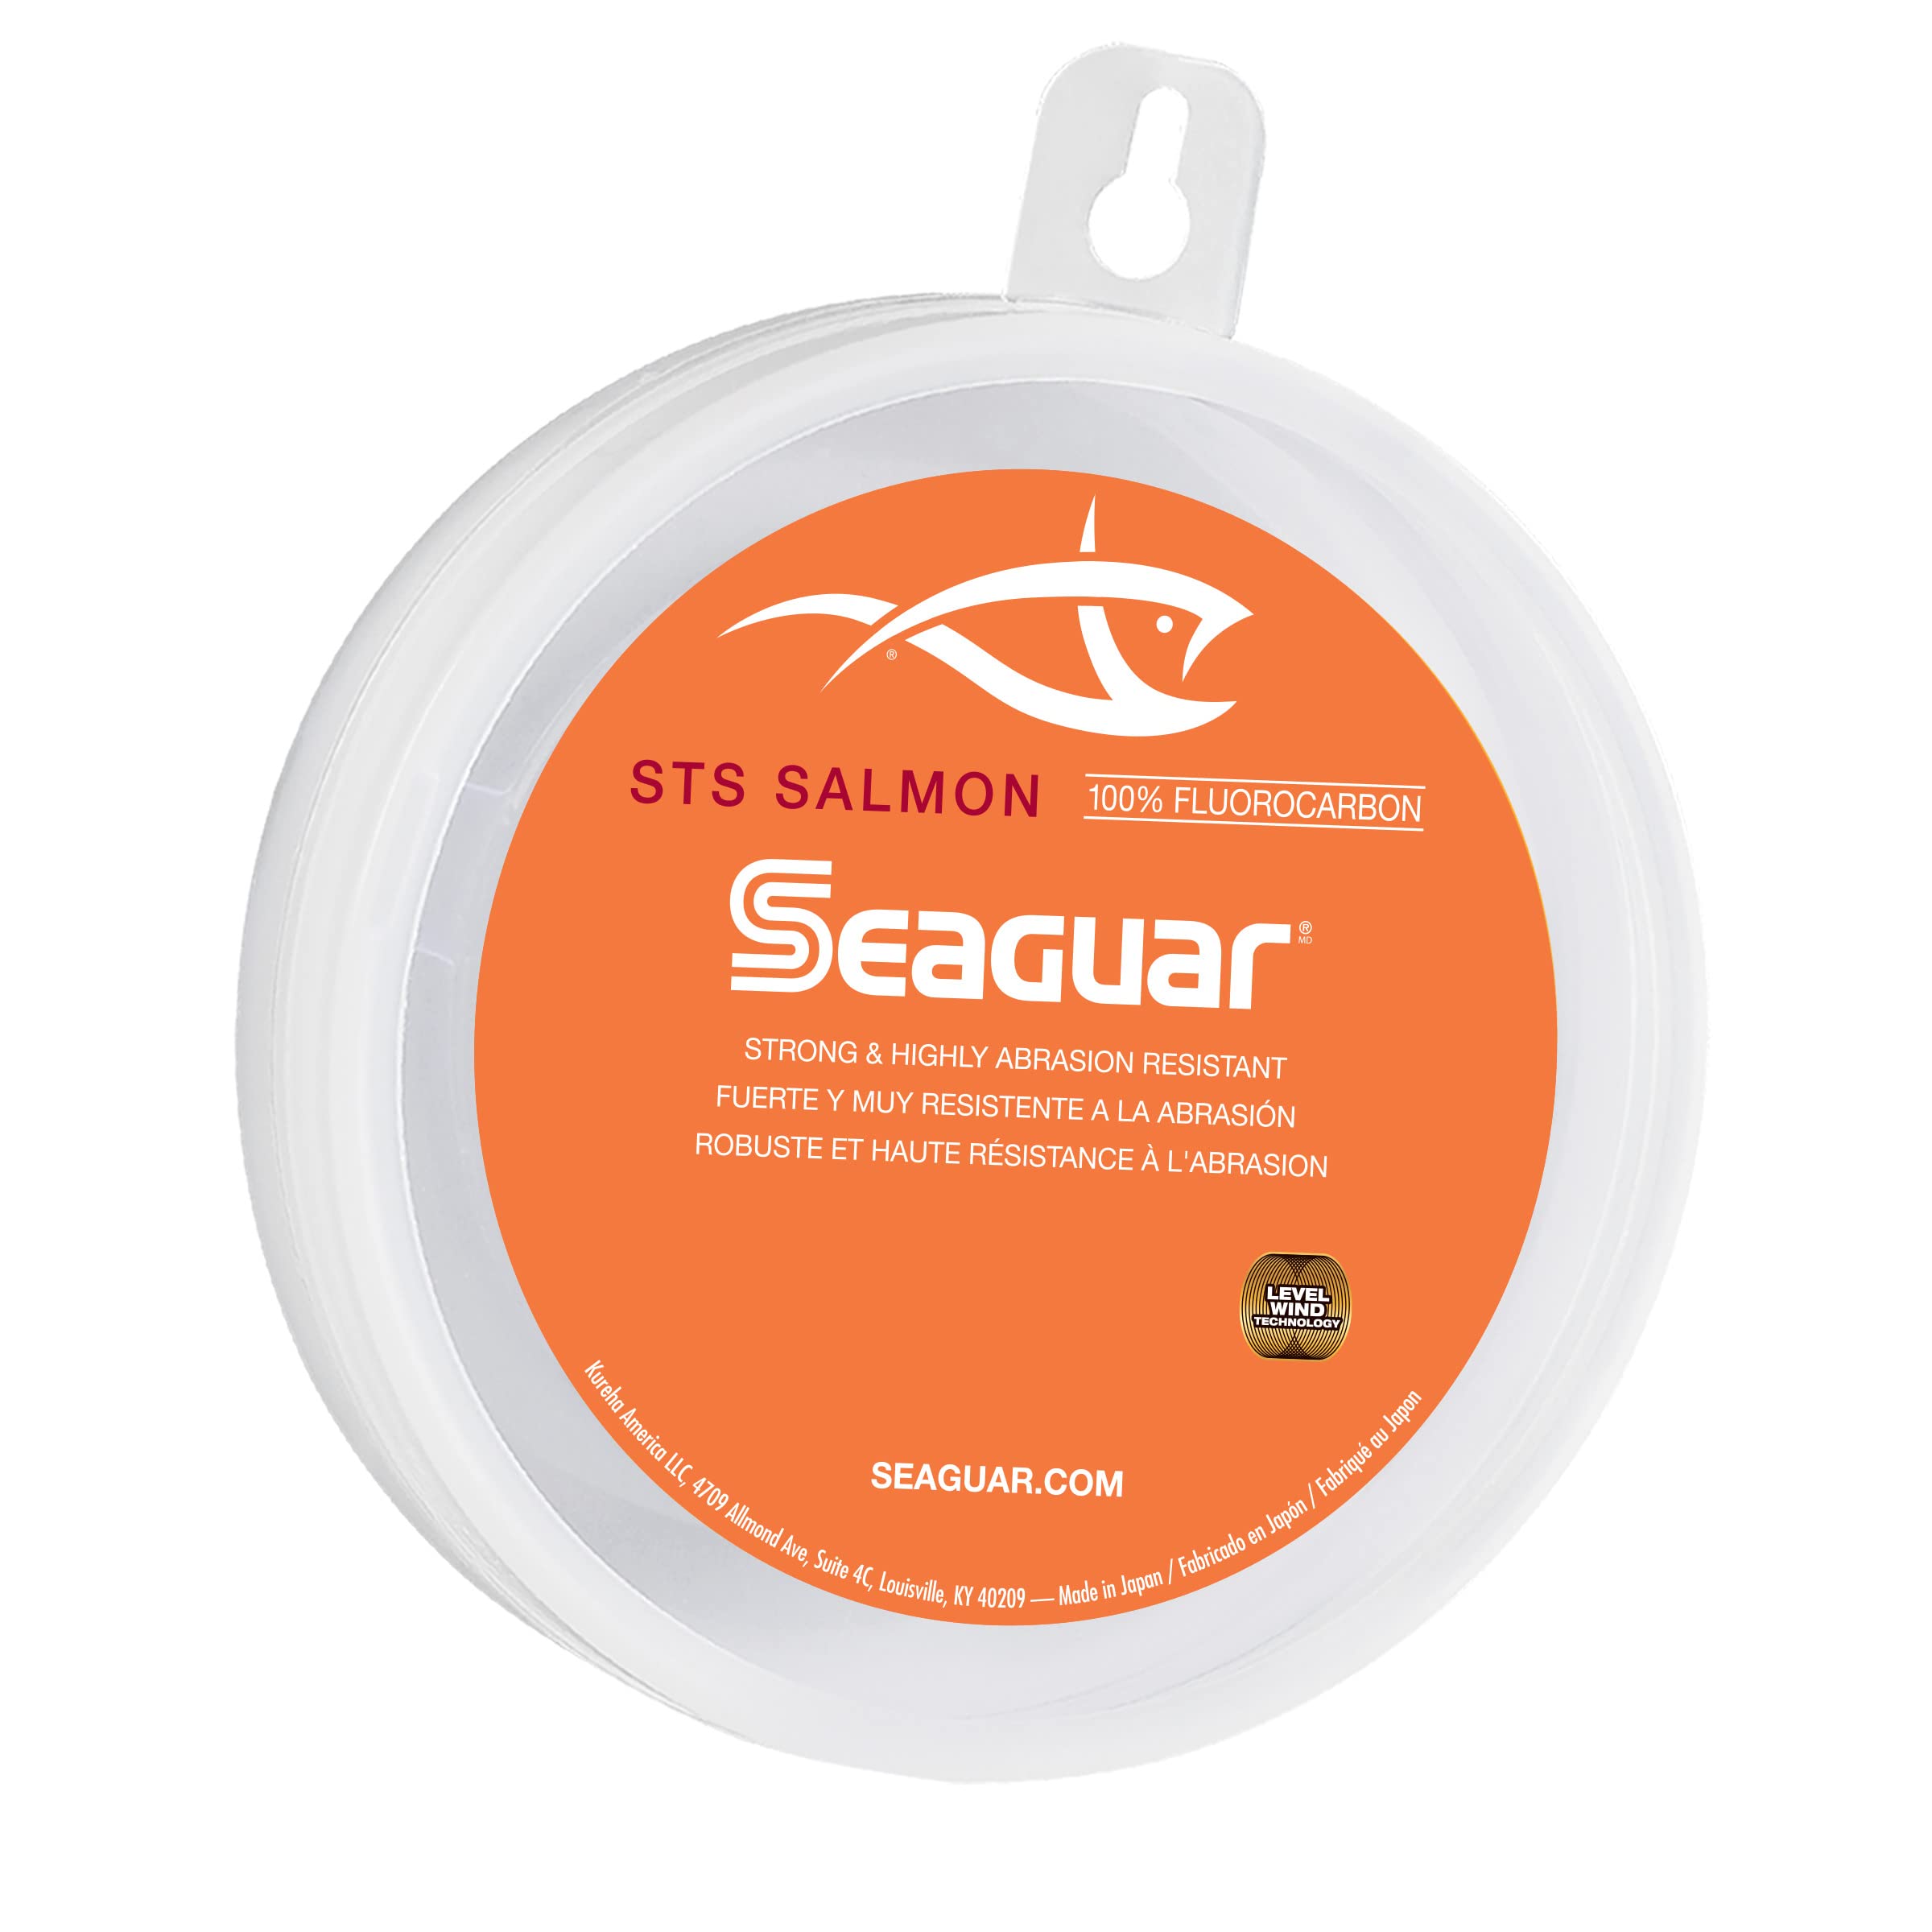 Seaguar STS Salmon Fishing Line, Strong and Abrasion Resistant, Premium  100% Fluorocarbon Performance Fishing Leader, Virtually Invisible 40 lb  100yd Clear